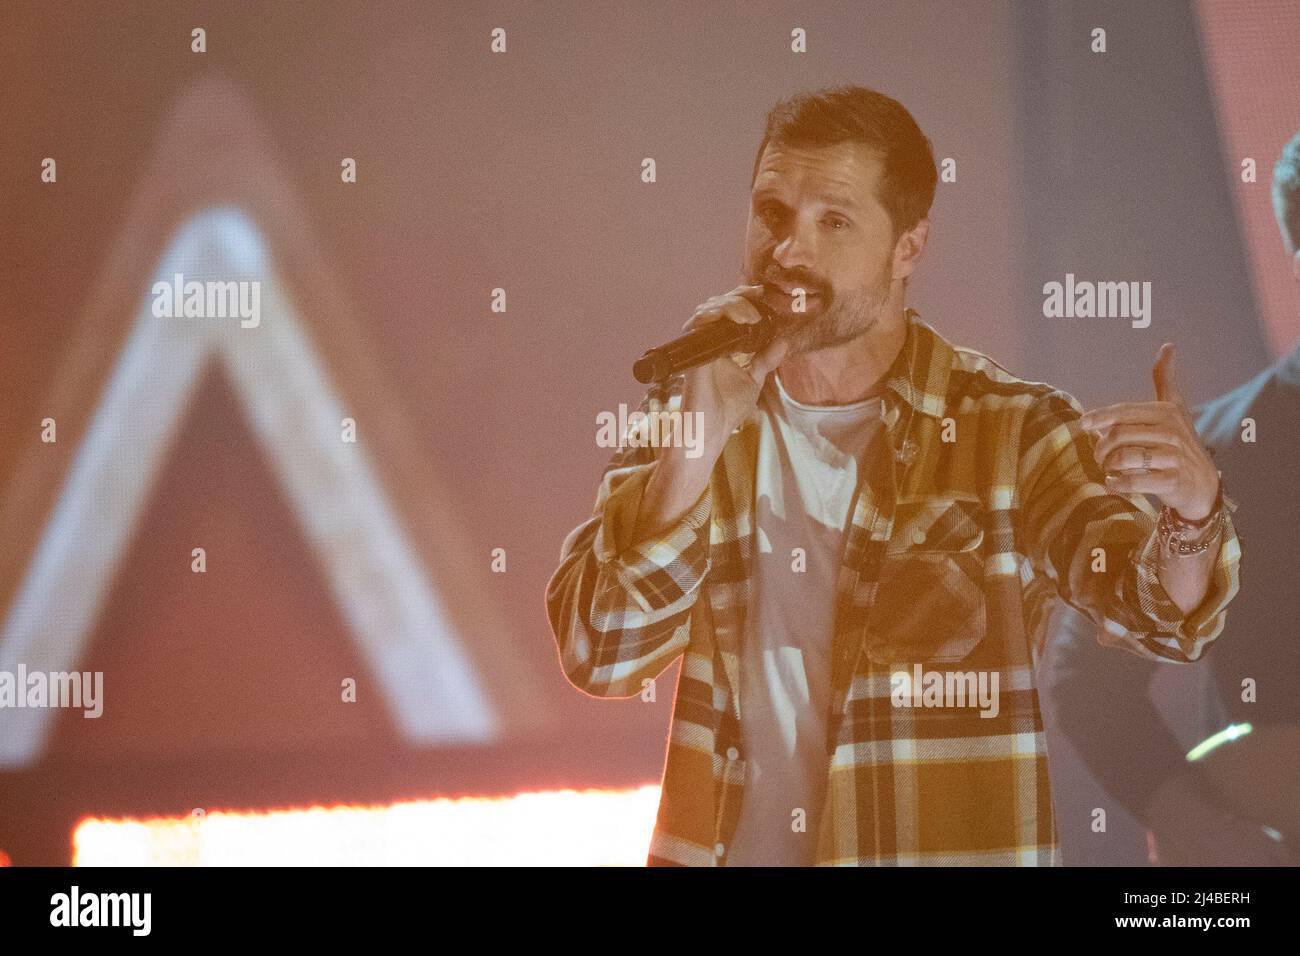 Nashville, Tenn. - April 11, 2022 Walker Hayes performs during the 2022 CMT Awards on April 11, 2022 at Municipal Auditorium in Nashville, Tenn. Credit: Jamie Gilliam/The Photo Access Stock Photo